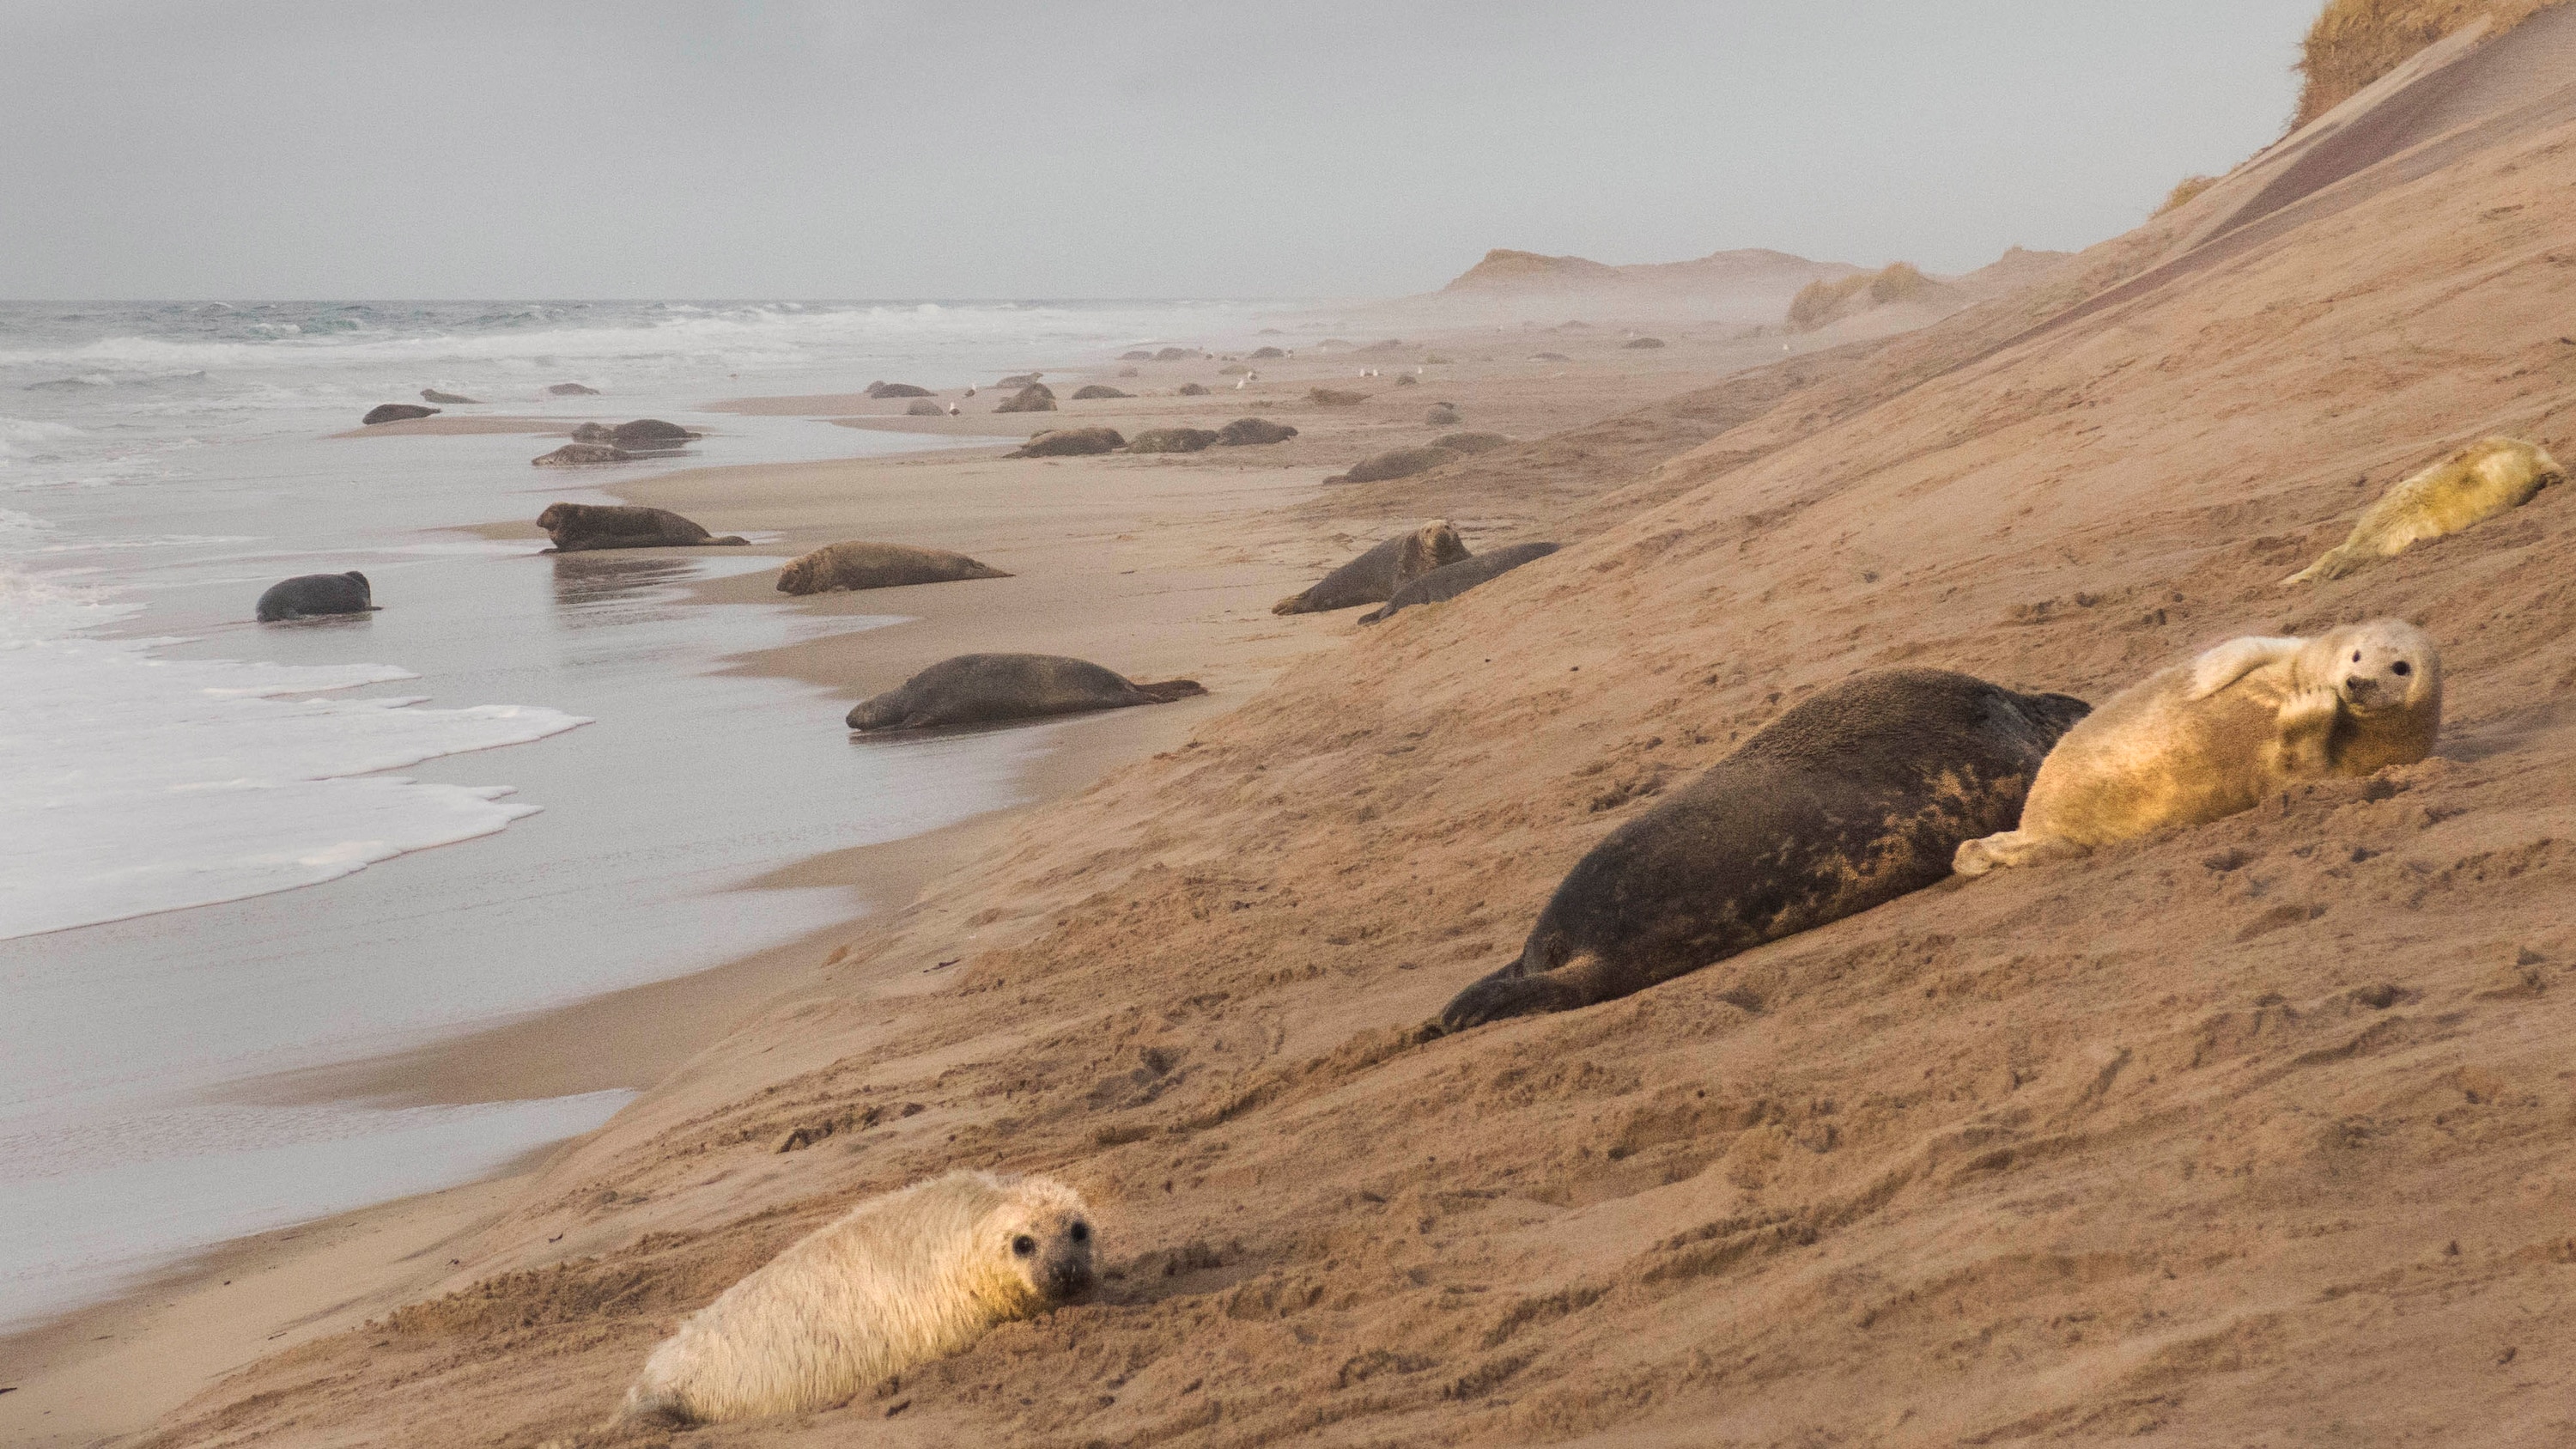 Sable Island: The perfect home for grey seals